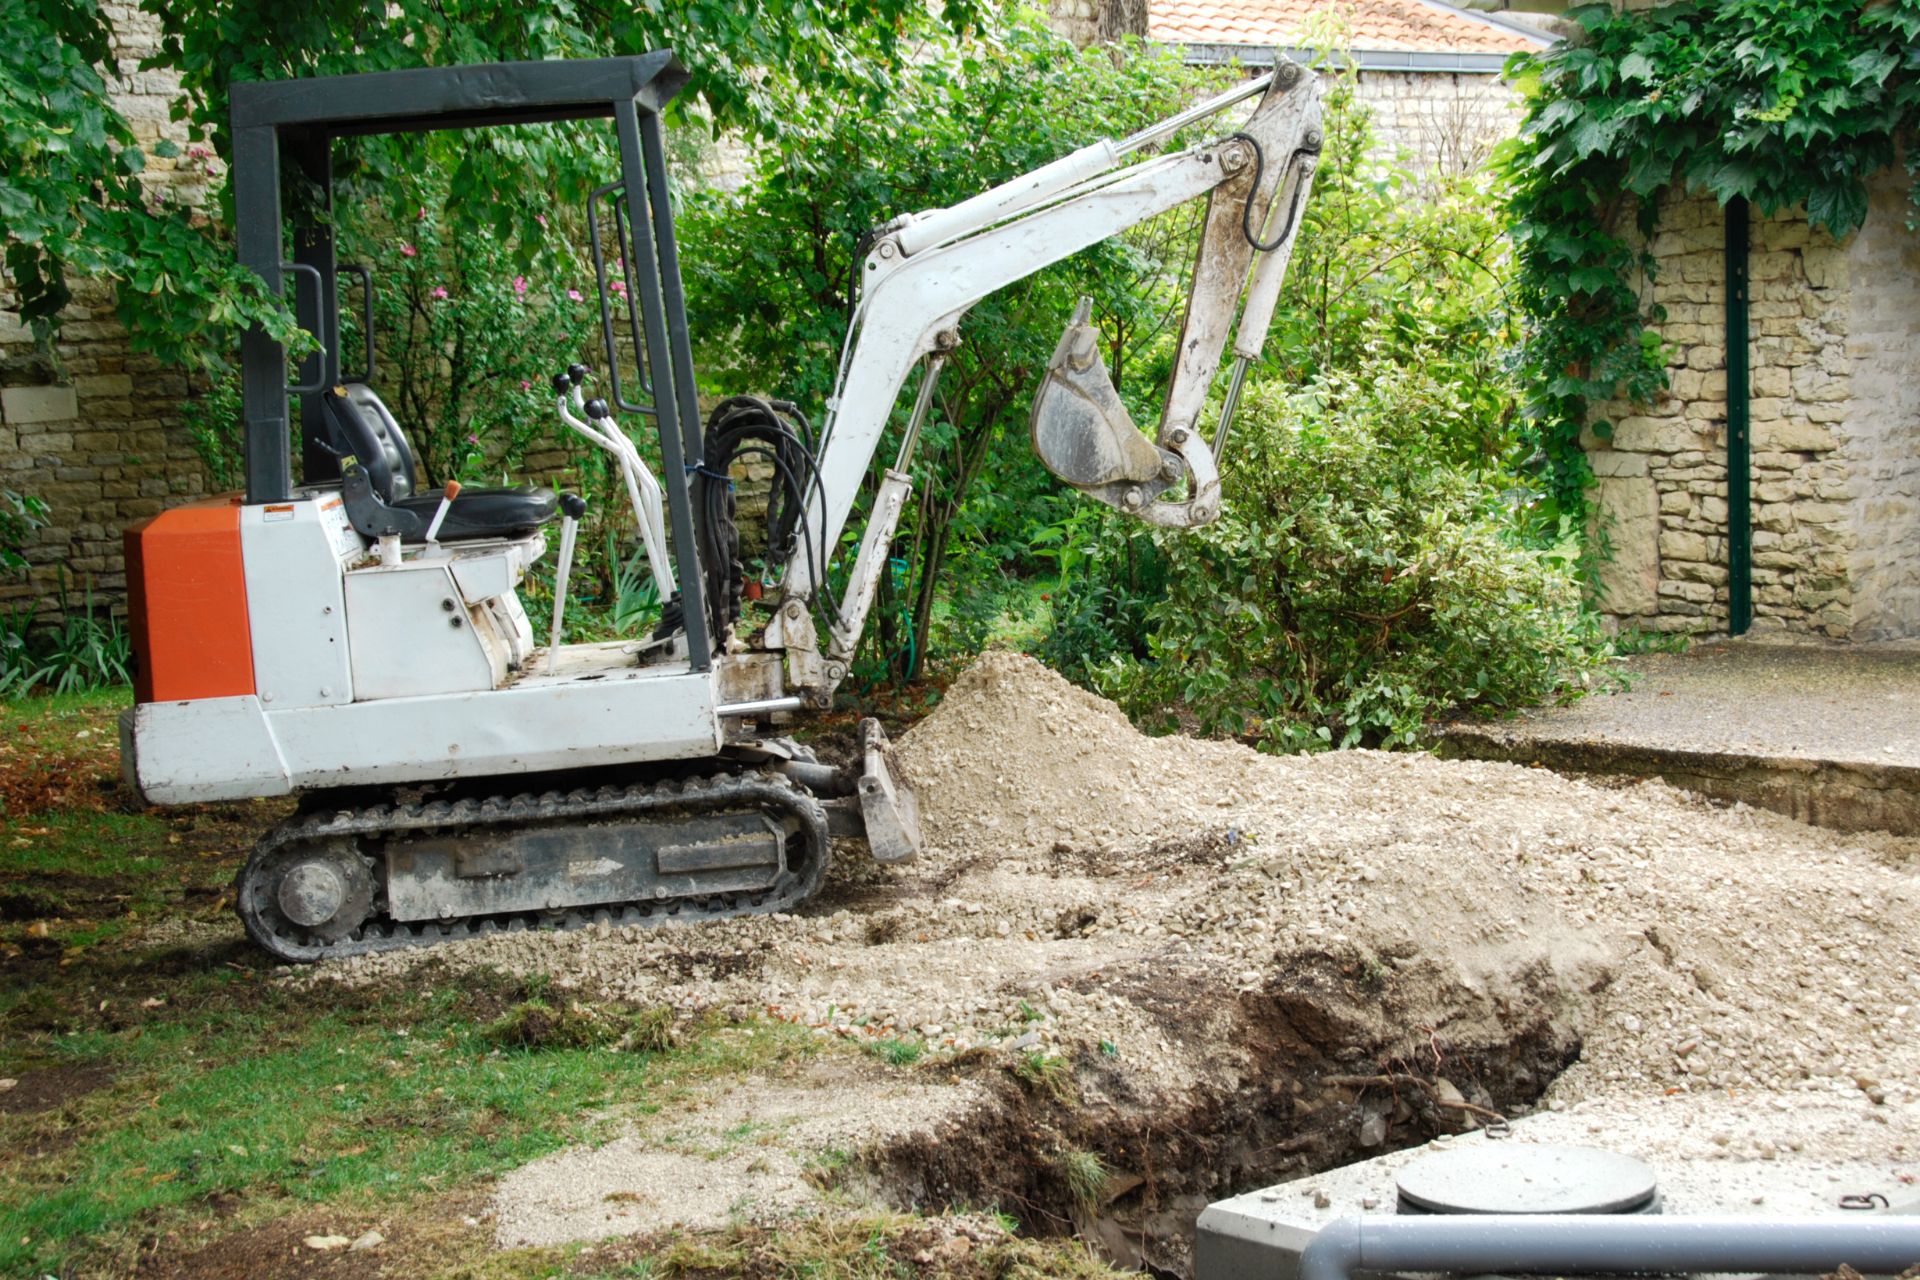 About Us: A small excavator digging a hole in a yard.